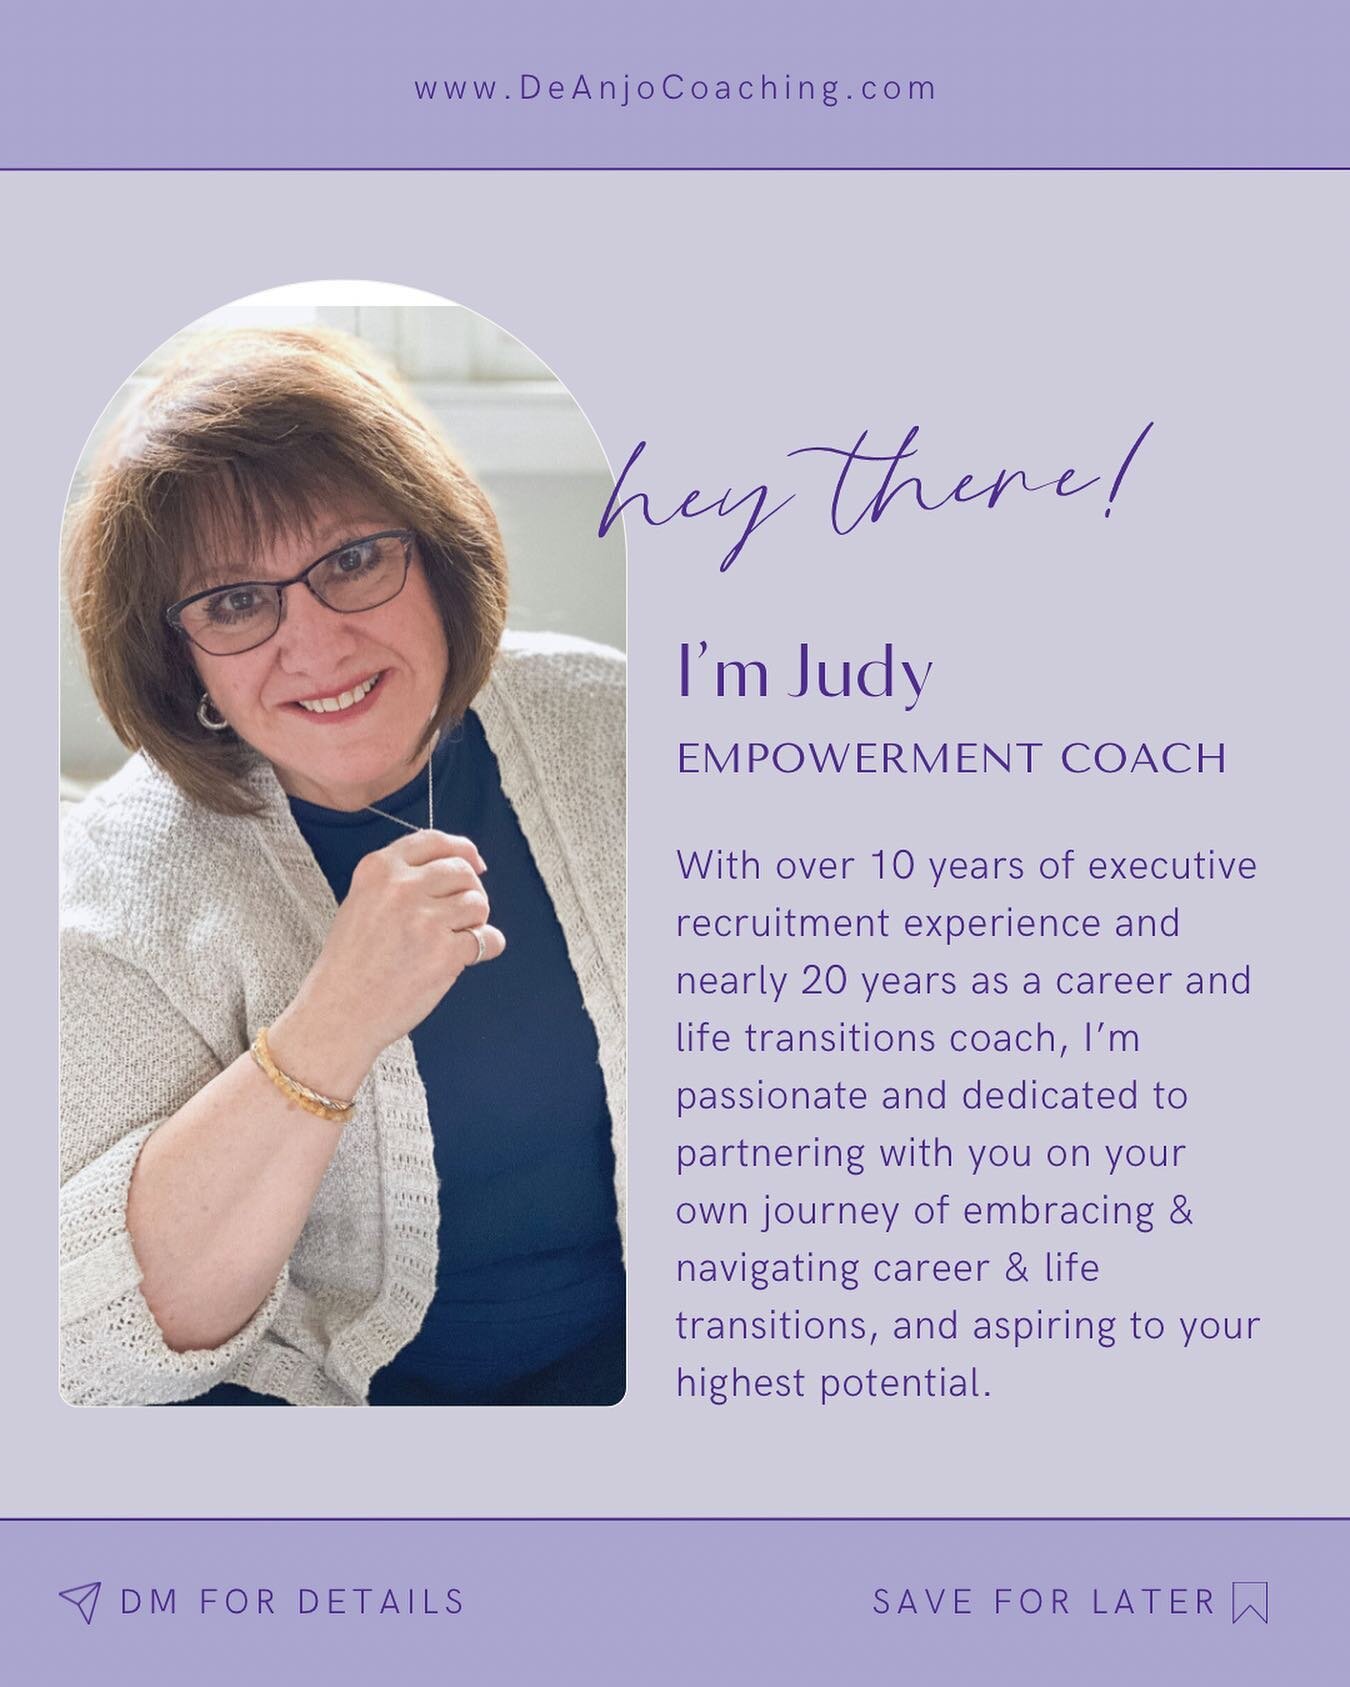 After my personal and professional life came crashing down, I built a life of fulfillment and purpose.  Now, I help hundreds of others reach their goals and build a life they love. #empowermentcoach #njfemaleentrepreneurs #newjerseybusiness #bergenco